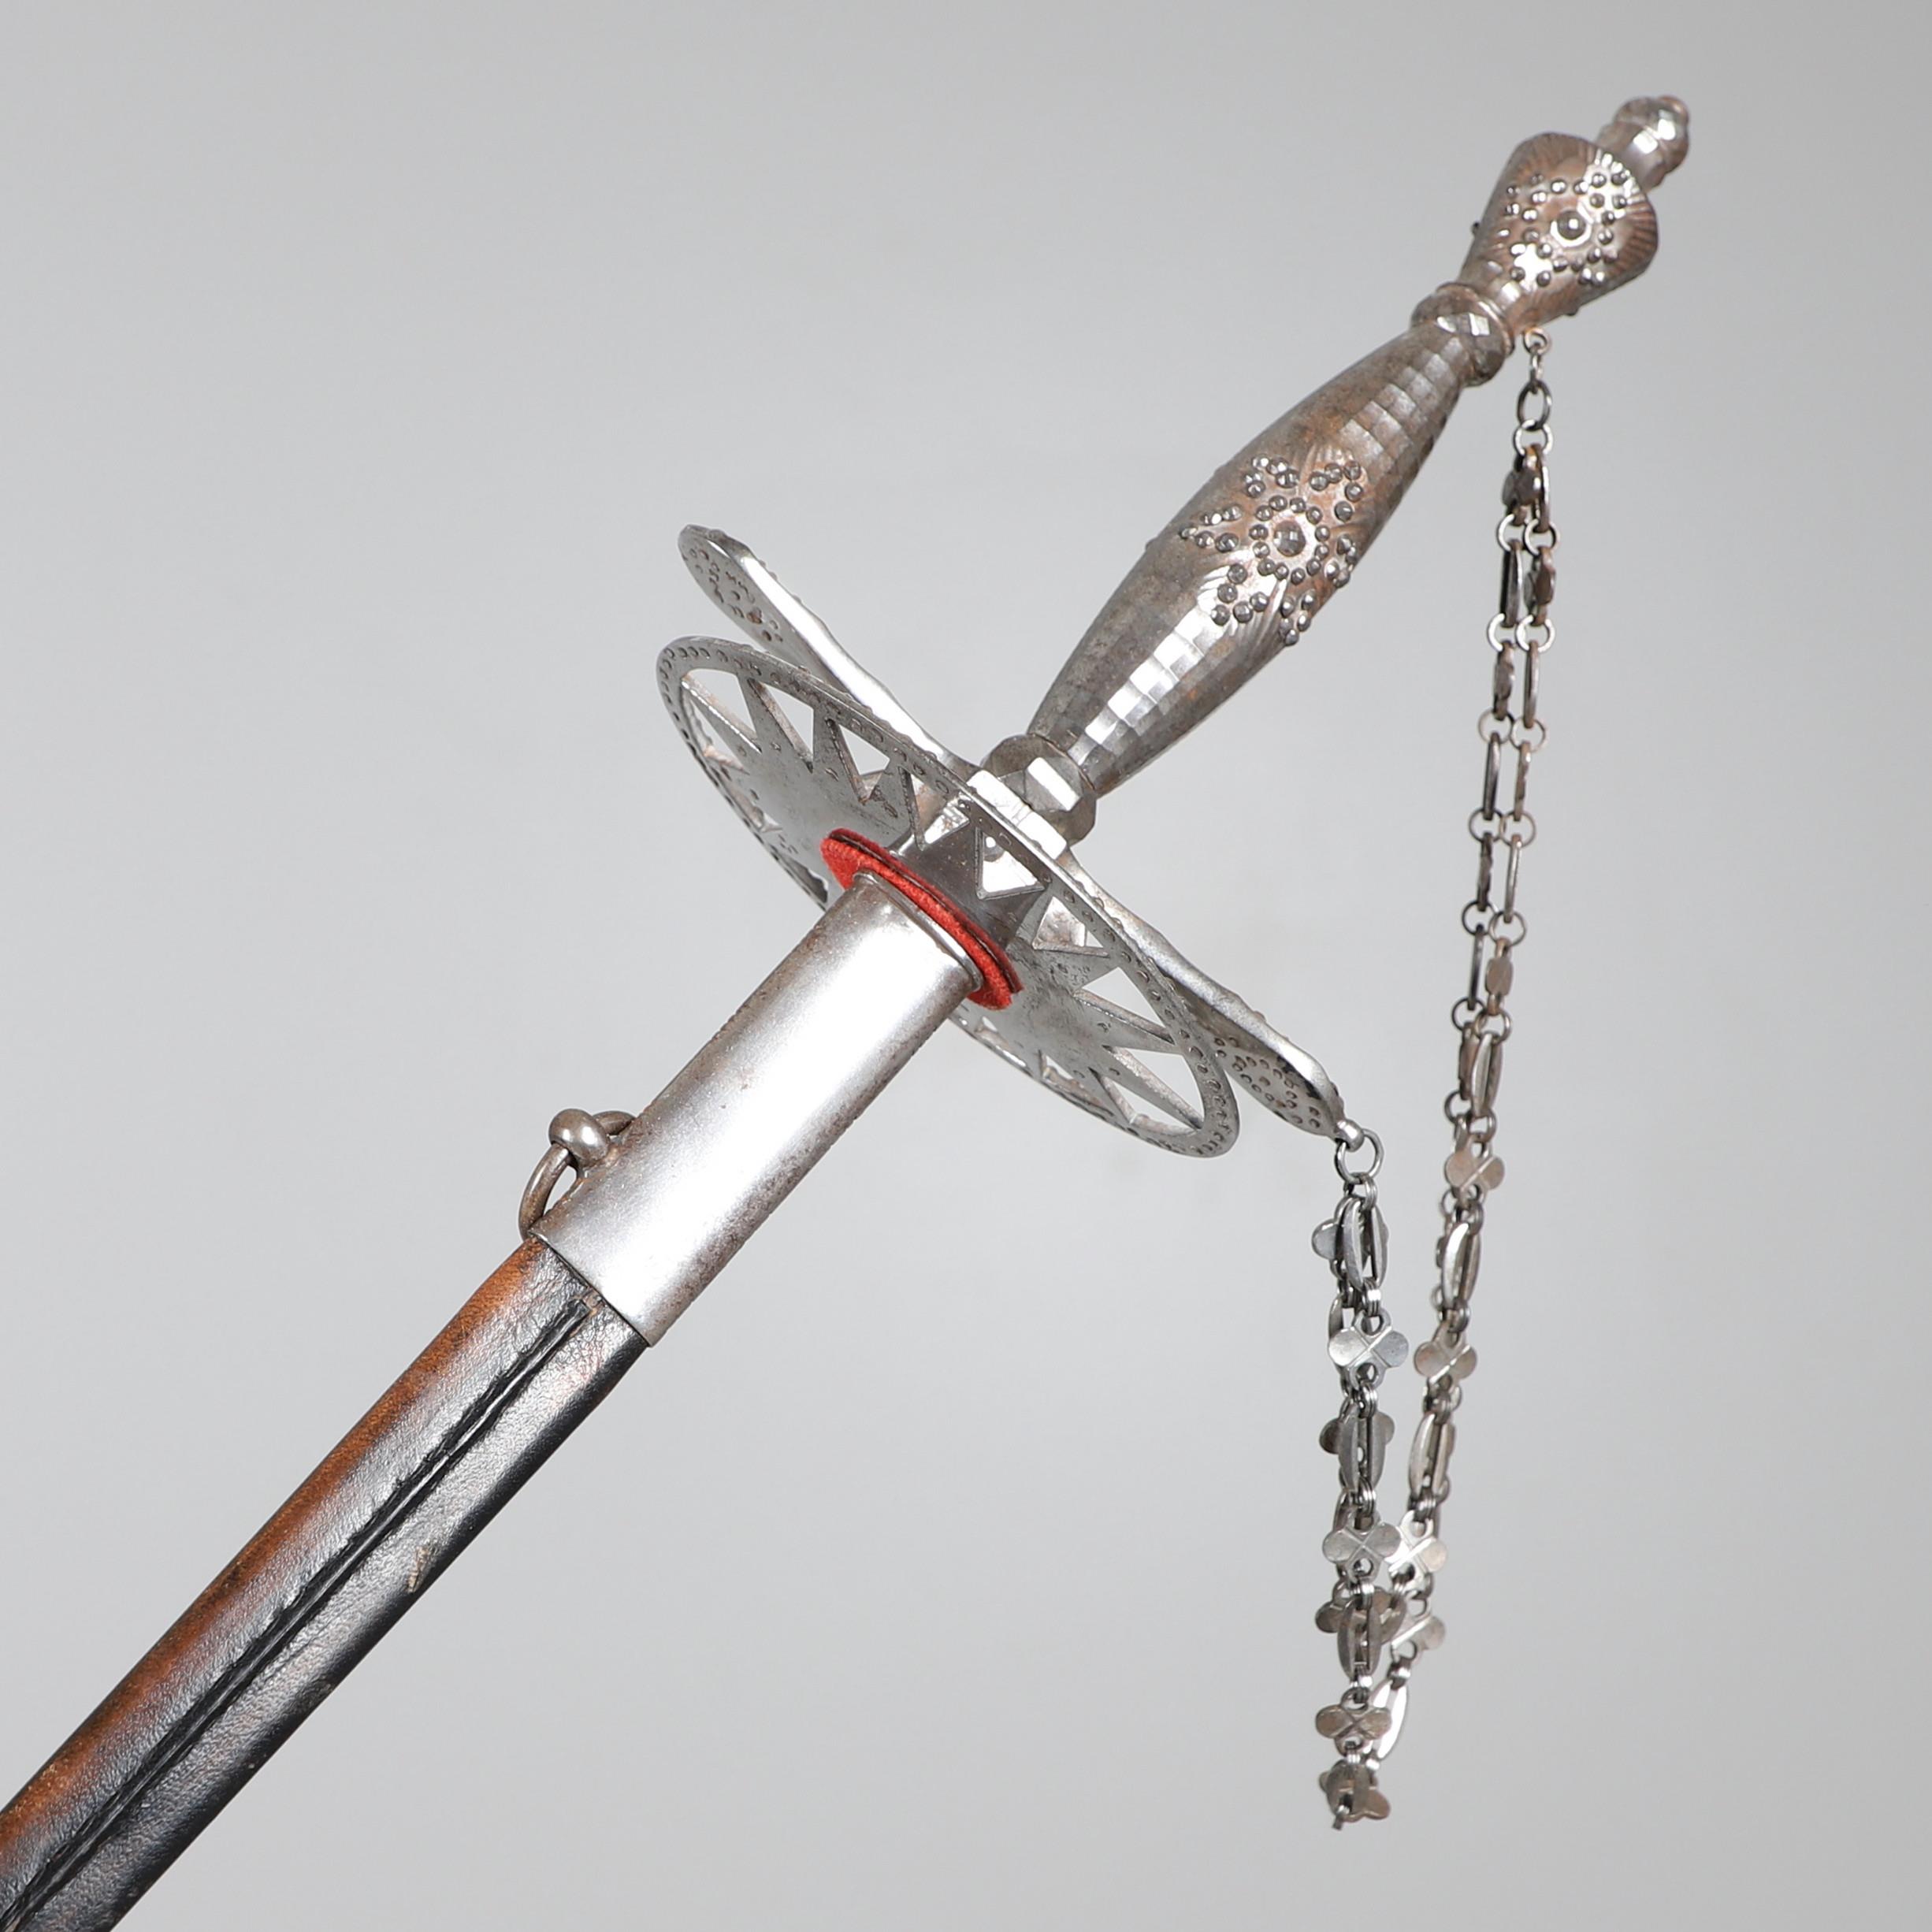 A WILKINSON COURT SWORD HAVING BELONGED TO THE HIGH SHERIFF OF WARWICKSHIRE. - Image 2 of 17